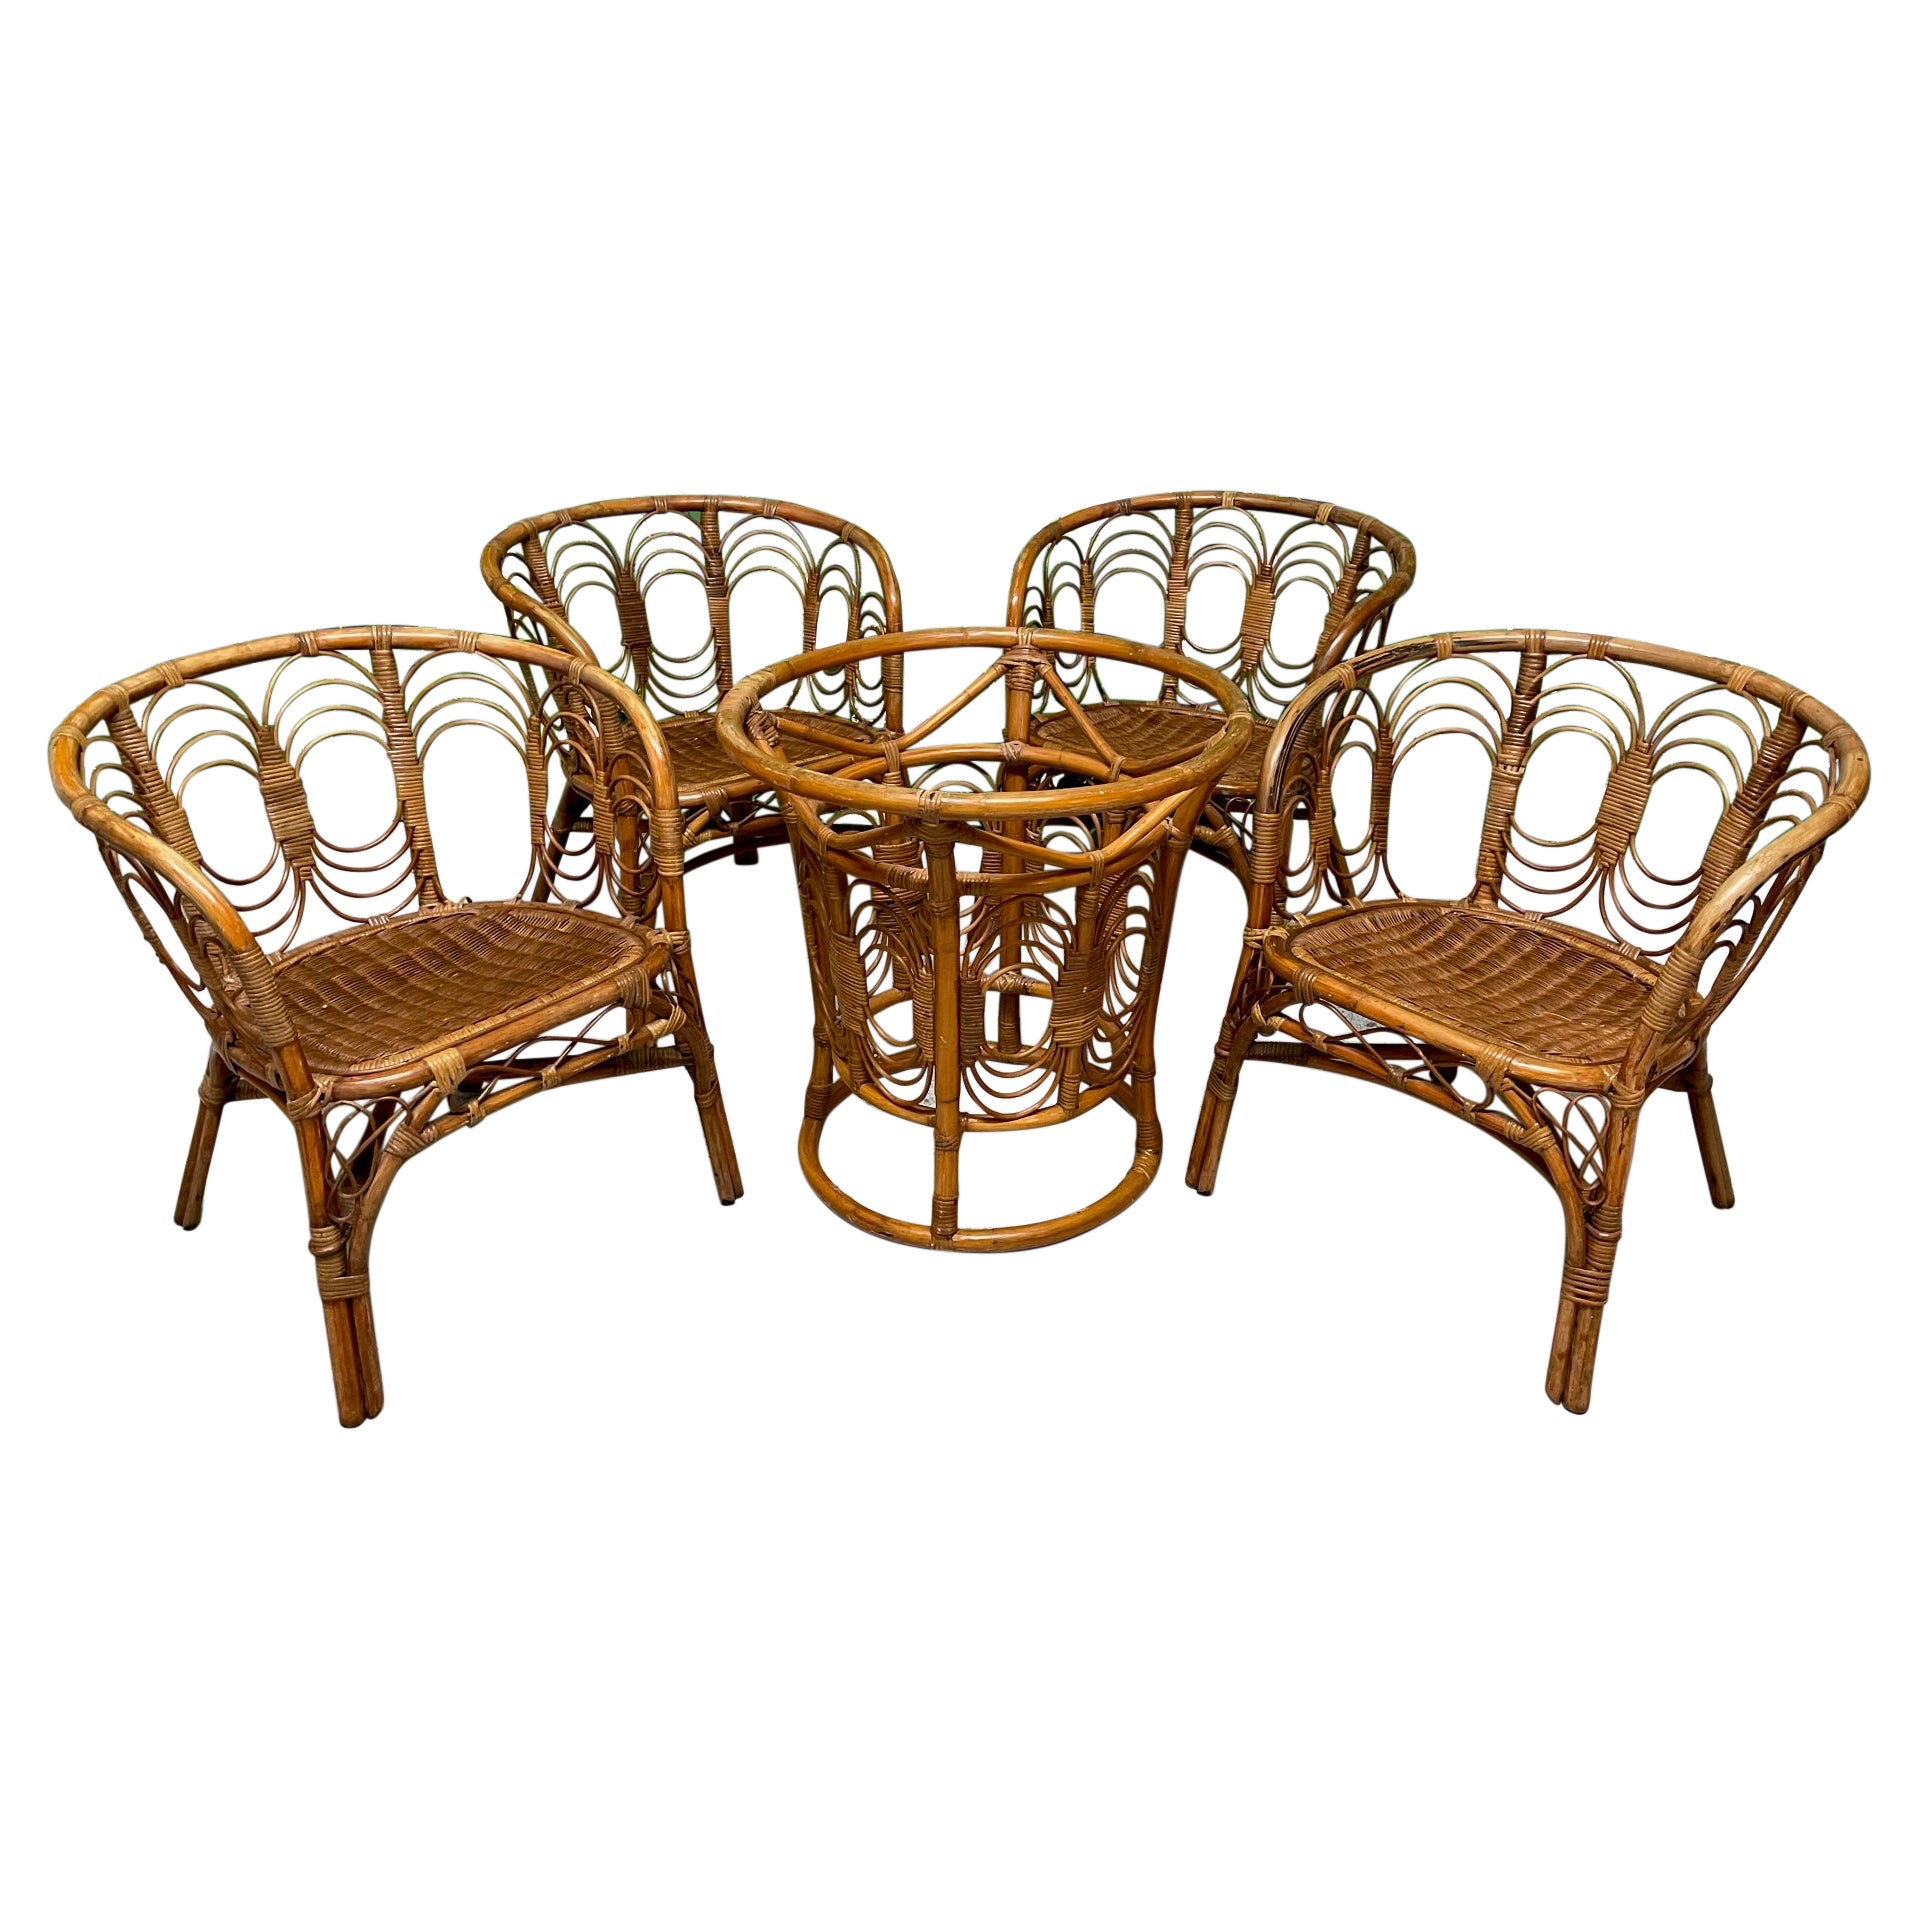 Vintage Rattan and Wicker Dining Set, Table and Four Chairs